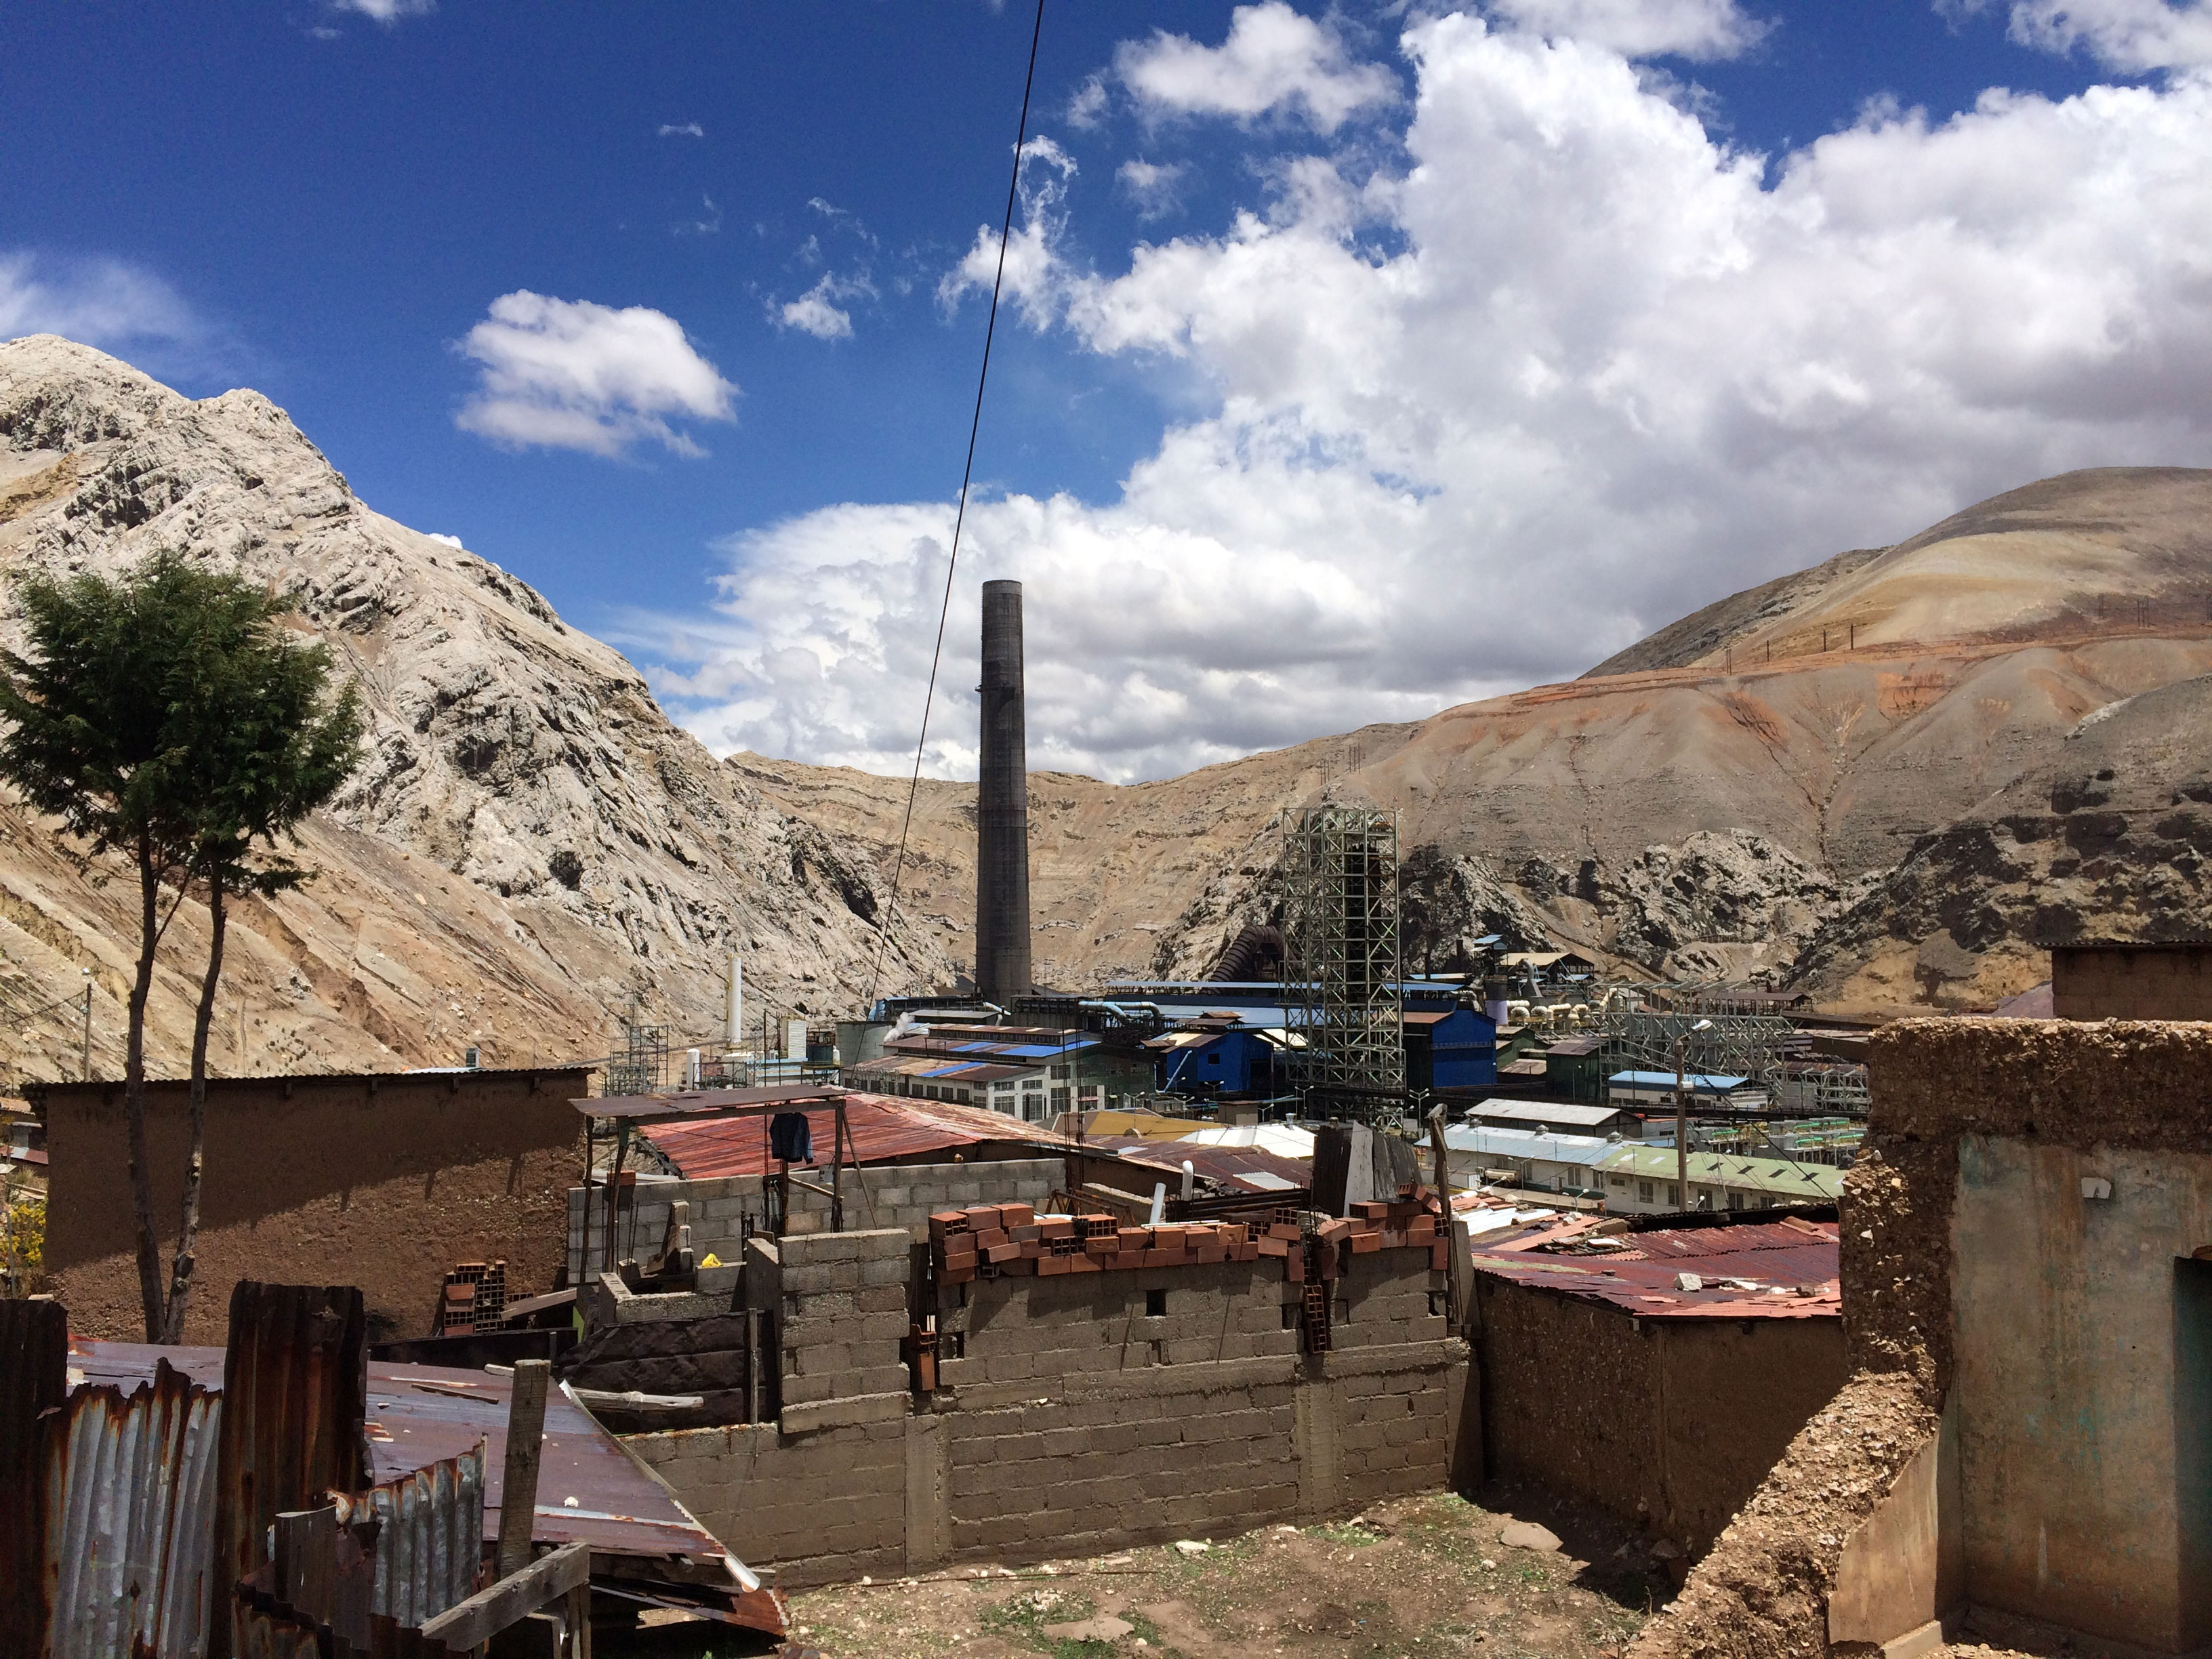 While the smelter in La Oroya has stopped operating, the hills remain contaminated, infertile and a risk to public health. (photo by Jed Koball, circa 2017)